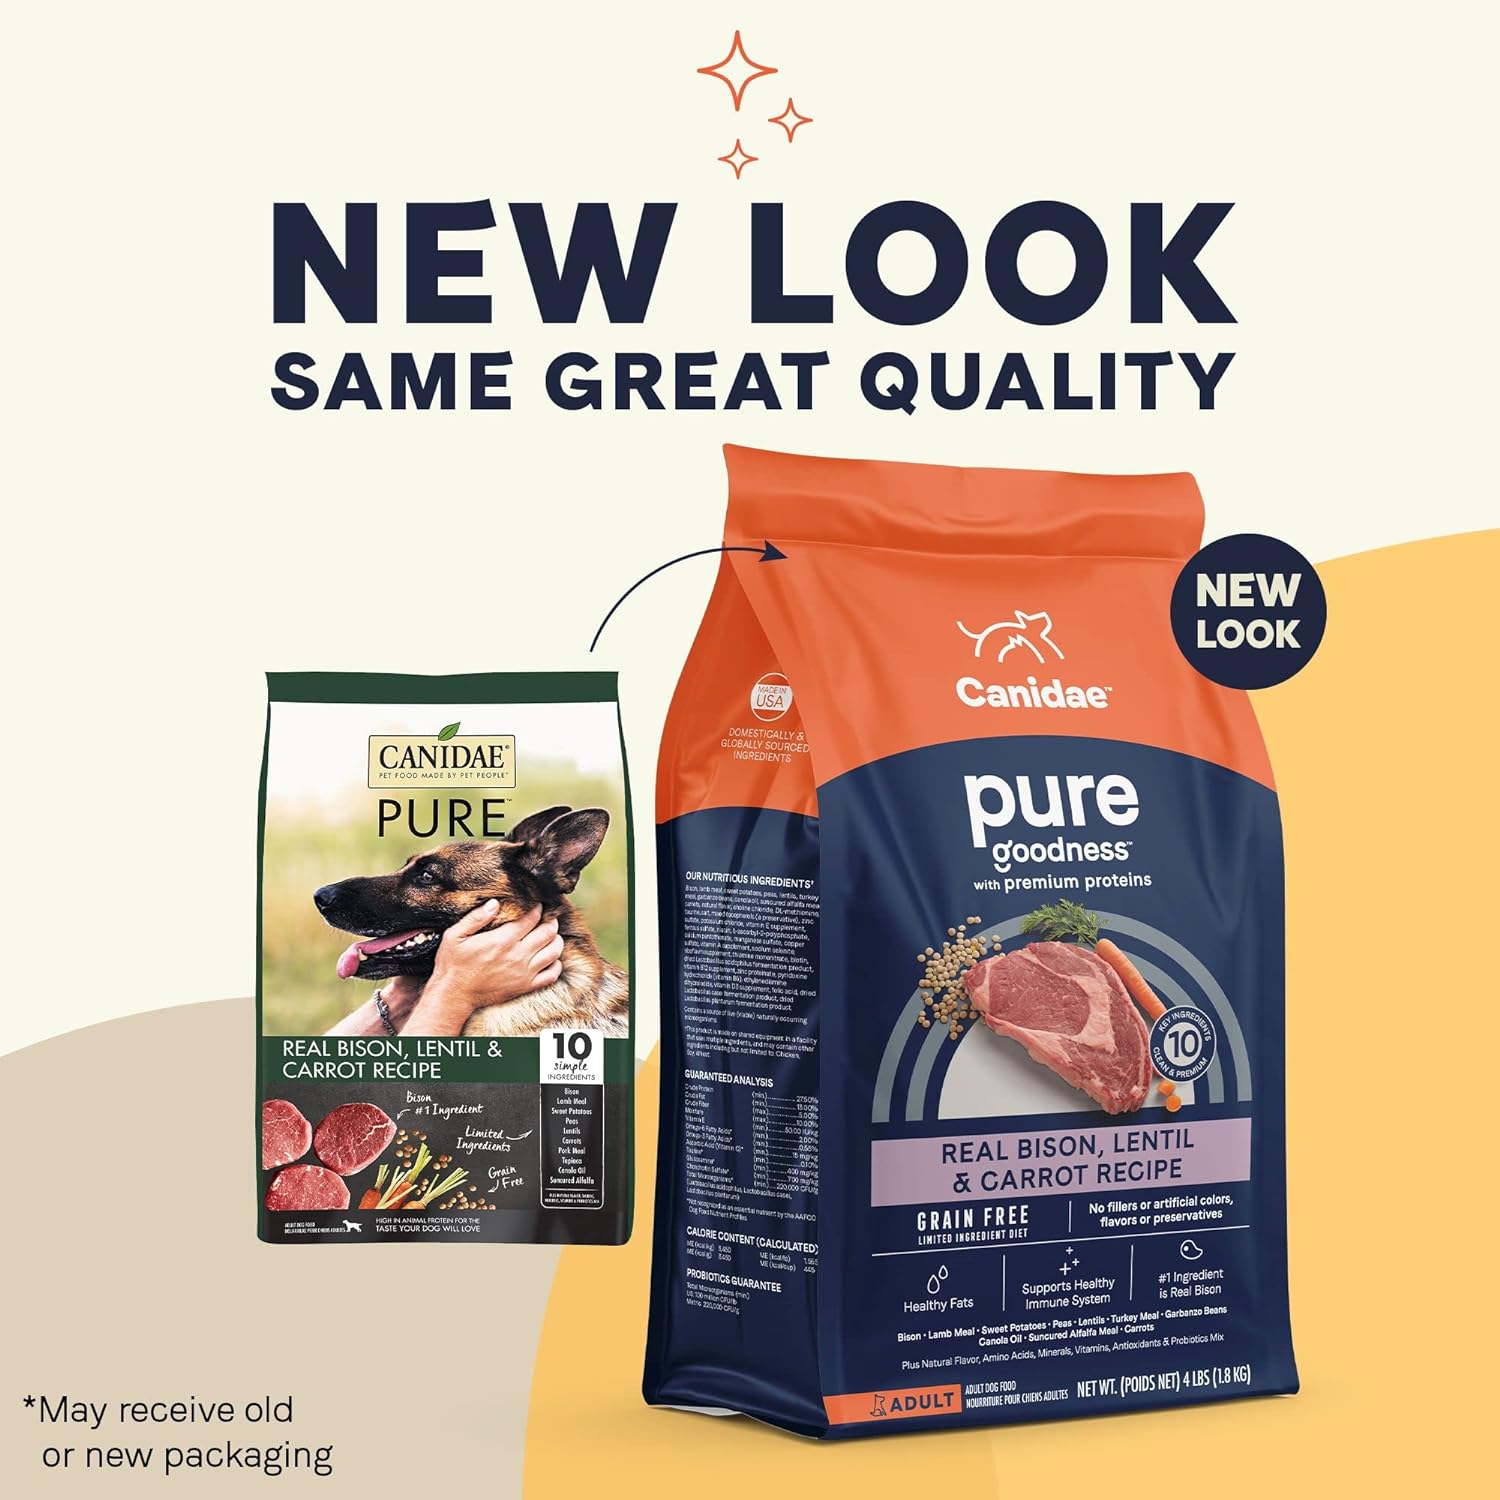 Canidae Pure Grain-Free Real Bison, Lentil & Carrot Recipe Dry Dog Food – Gallery Image 2